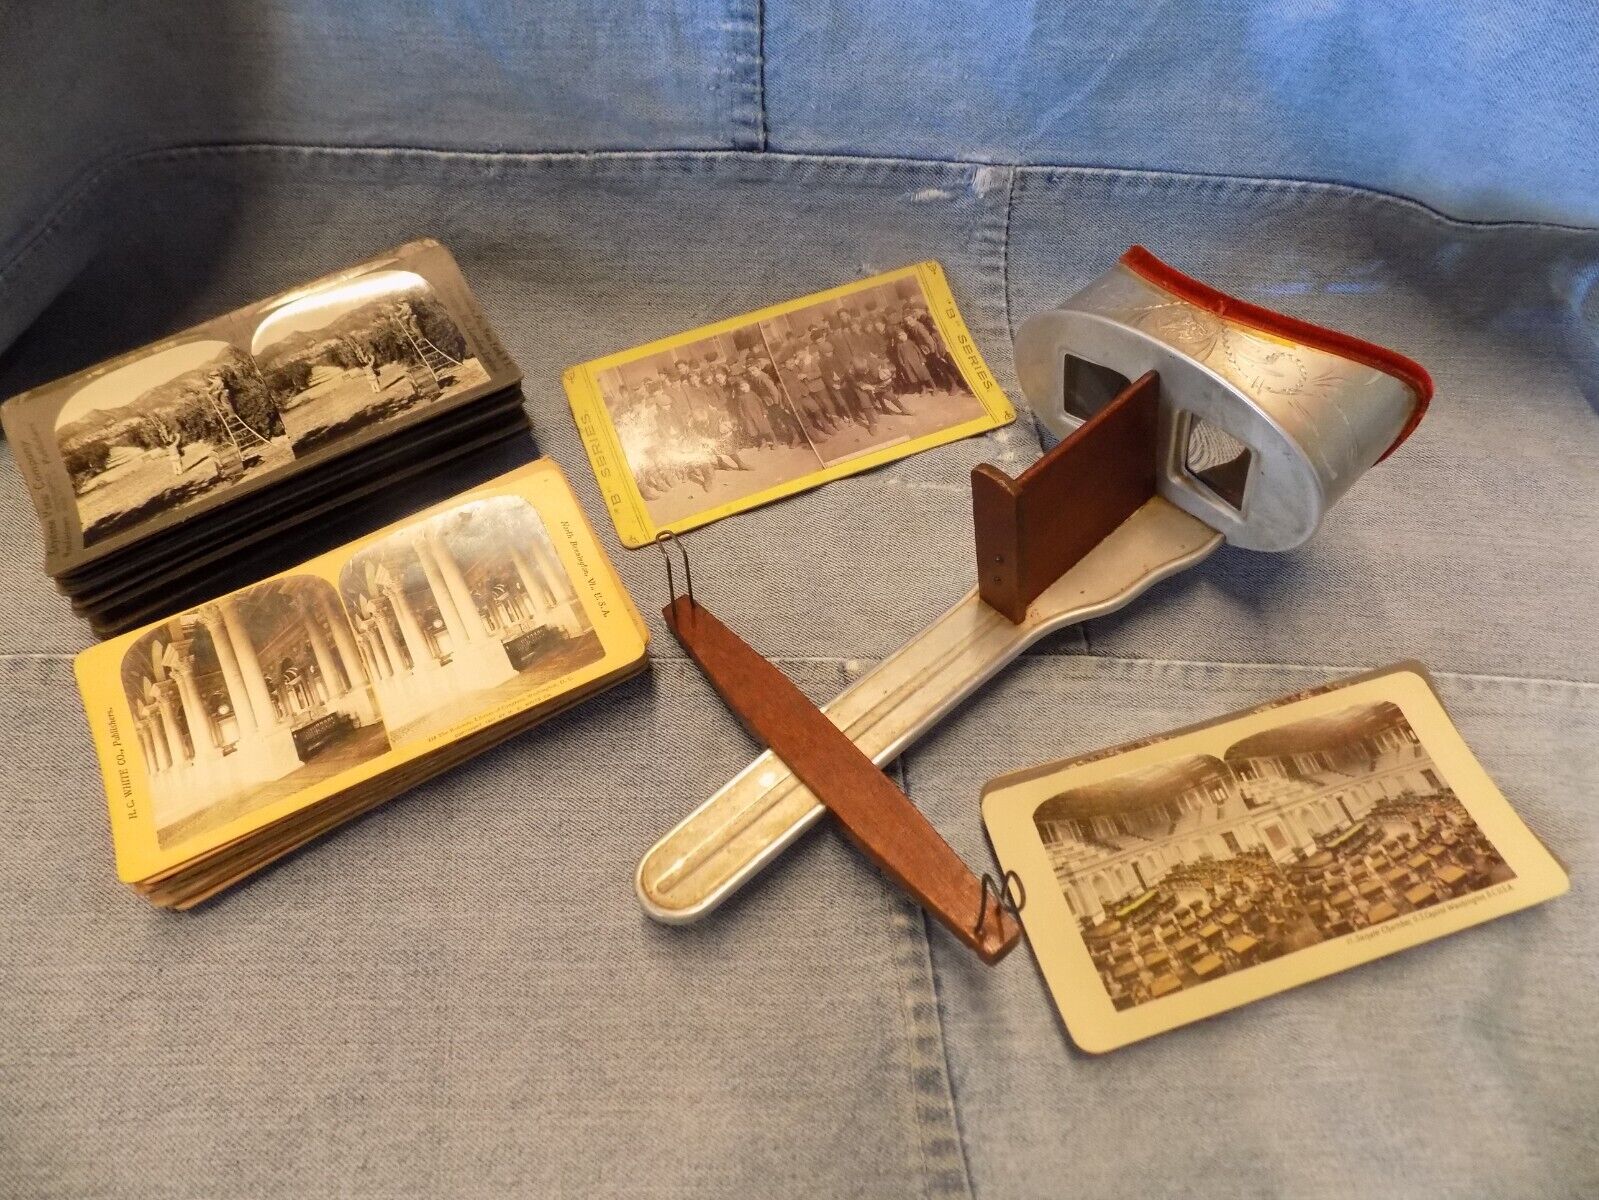 1902 Antique White Perfecscope Stereoscope Viewer With 35 Cards